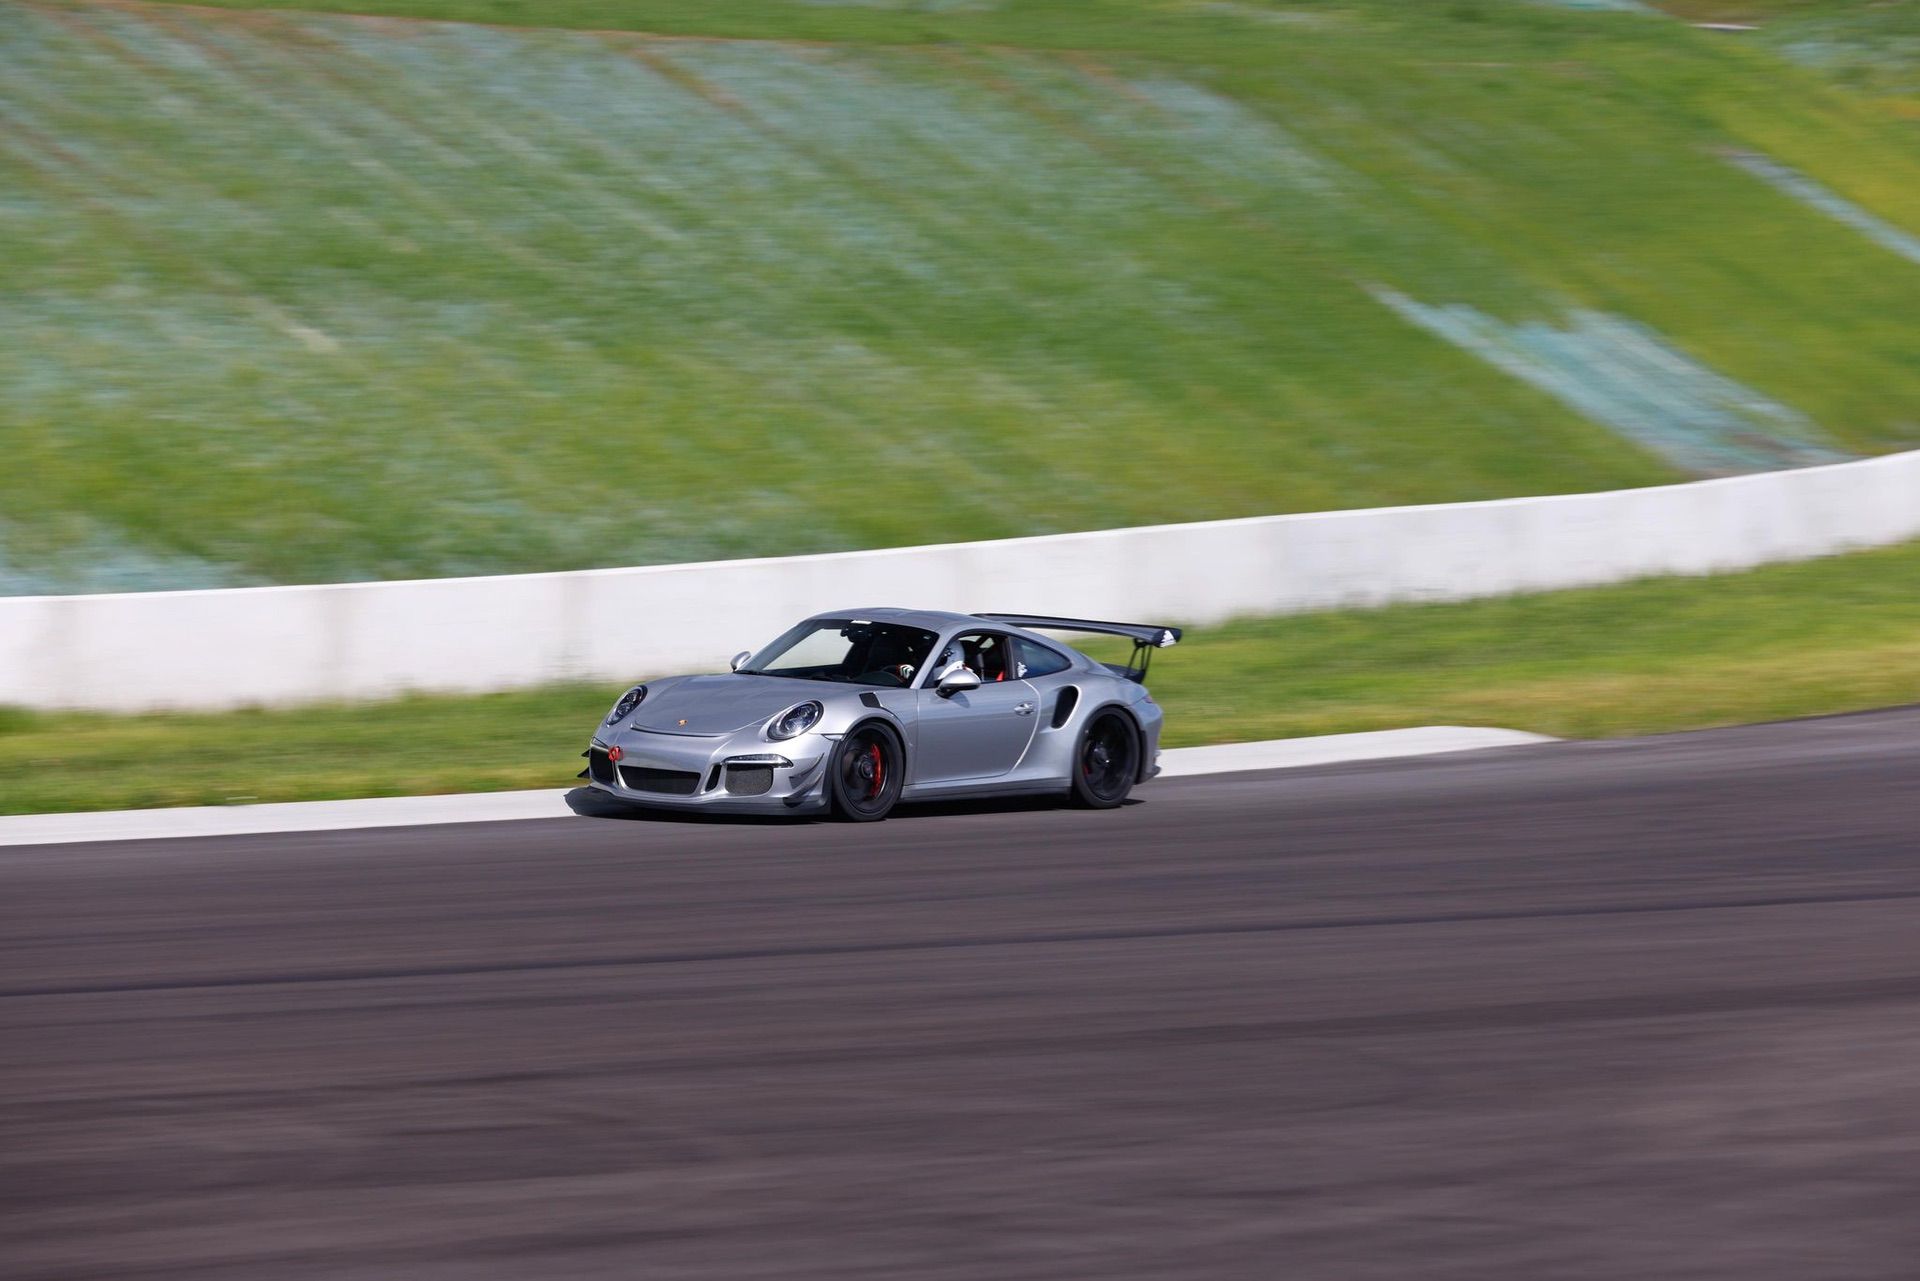 High performance Porsche car on track during event